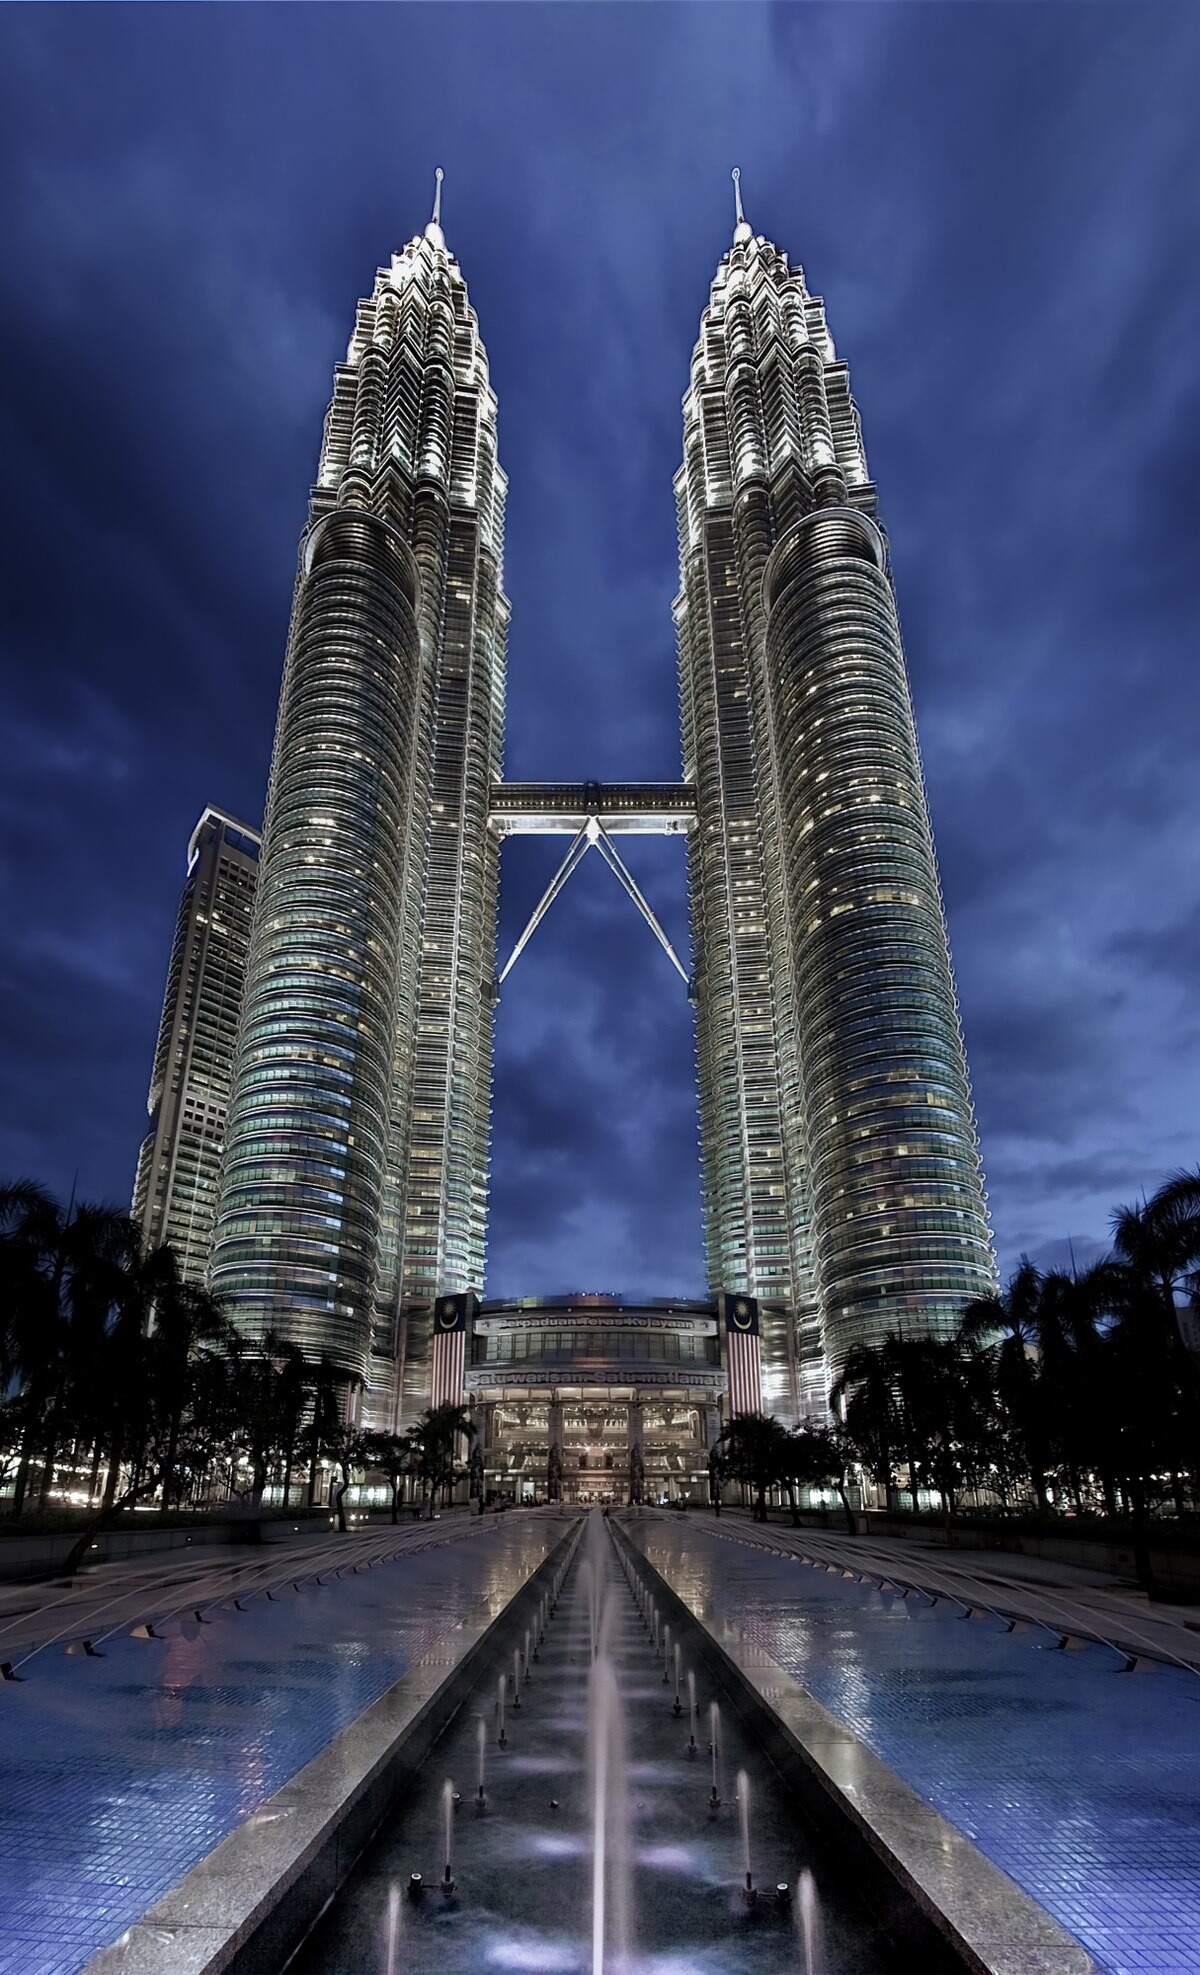 how many windows are in the petronas towers?